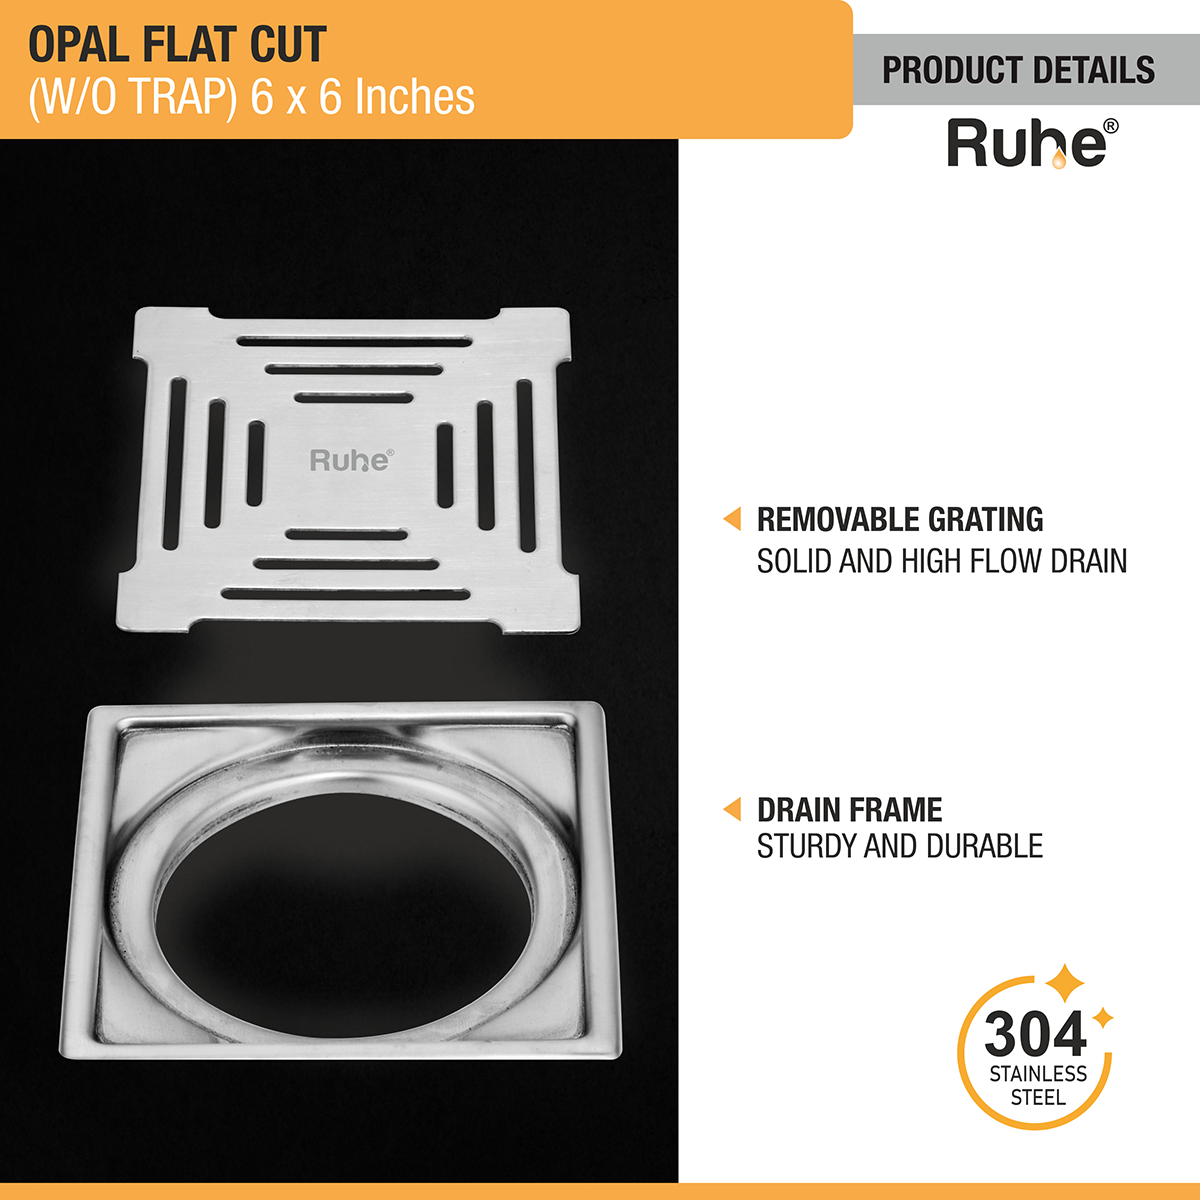 Opal Square Flat Cut 304-Grade Floor Drain (6 x 6 Inches) with removable grating and drain frame